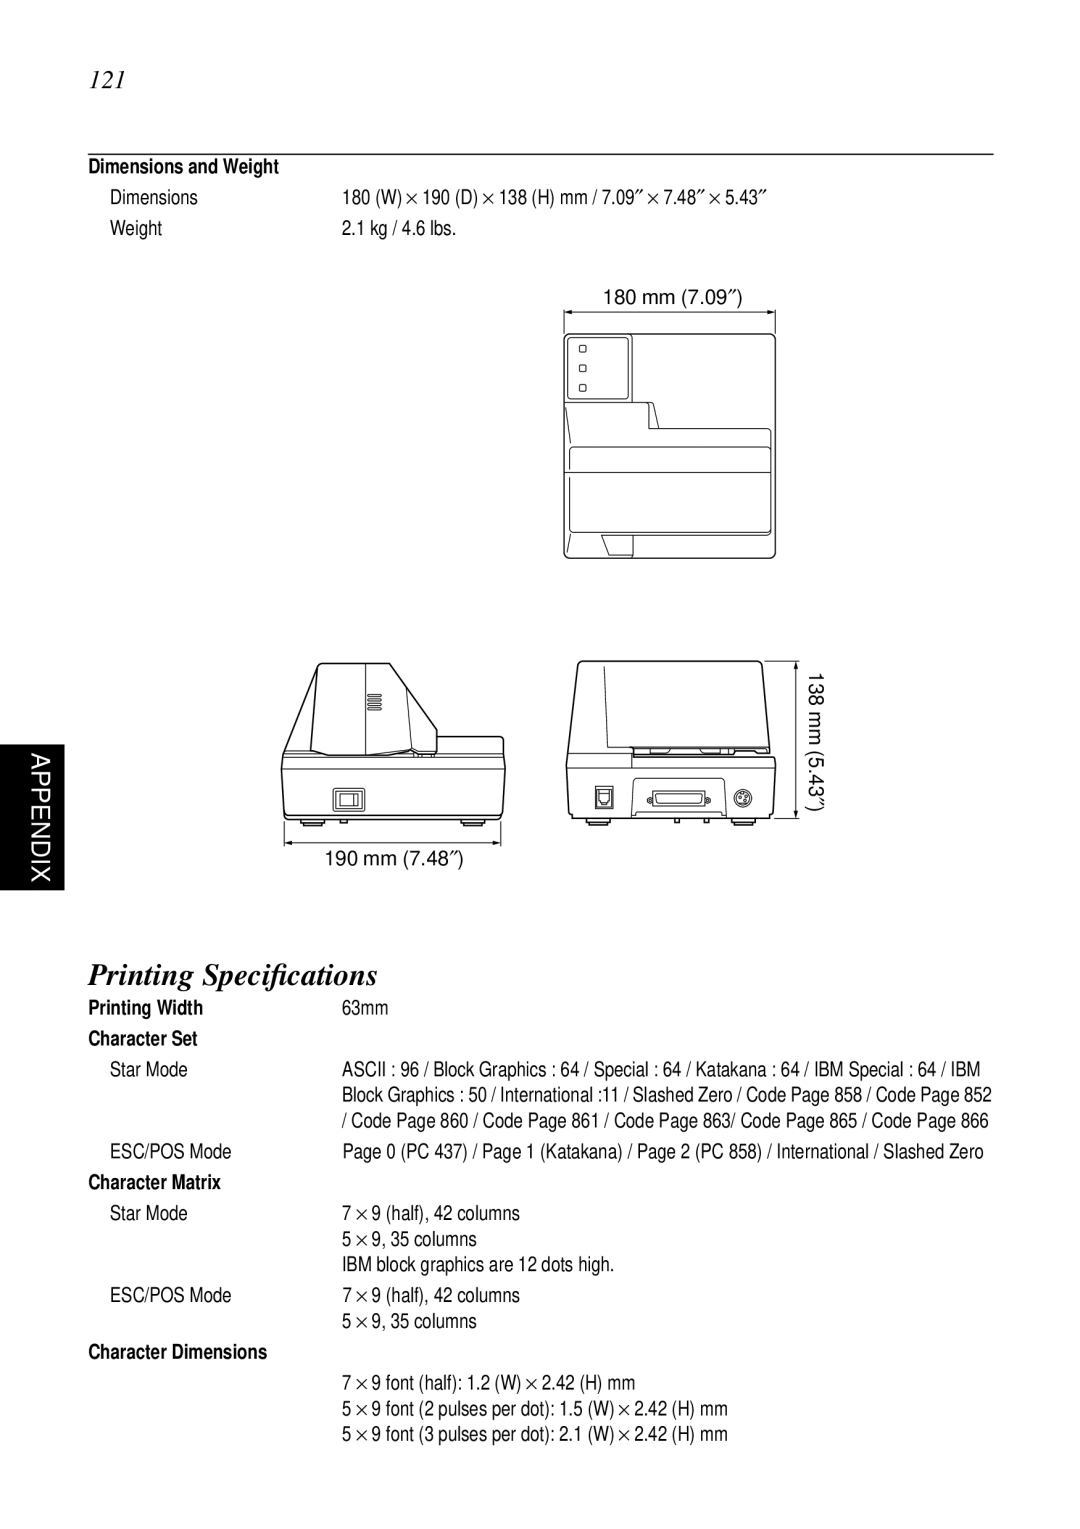 Star Micronics SP298 user manual Printing Speciﬁcations, Appendix, Dimensions and Weight, Printing Width, Character Set 